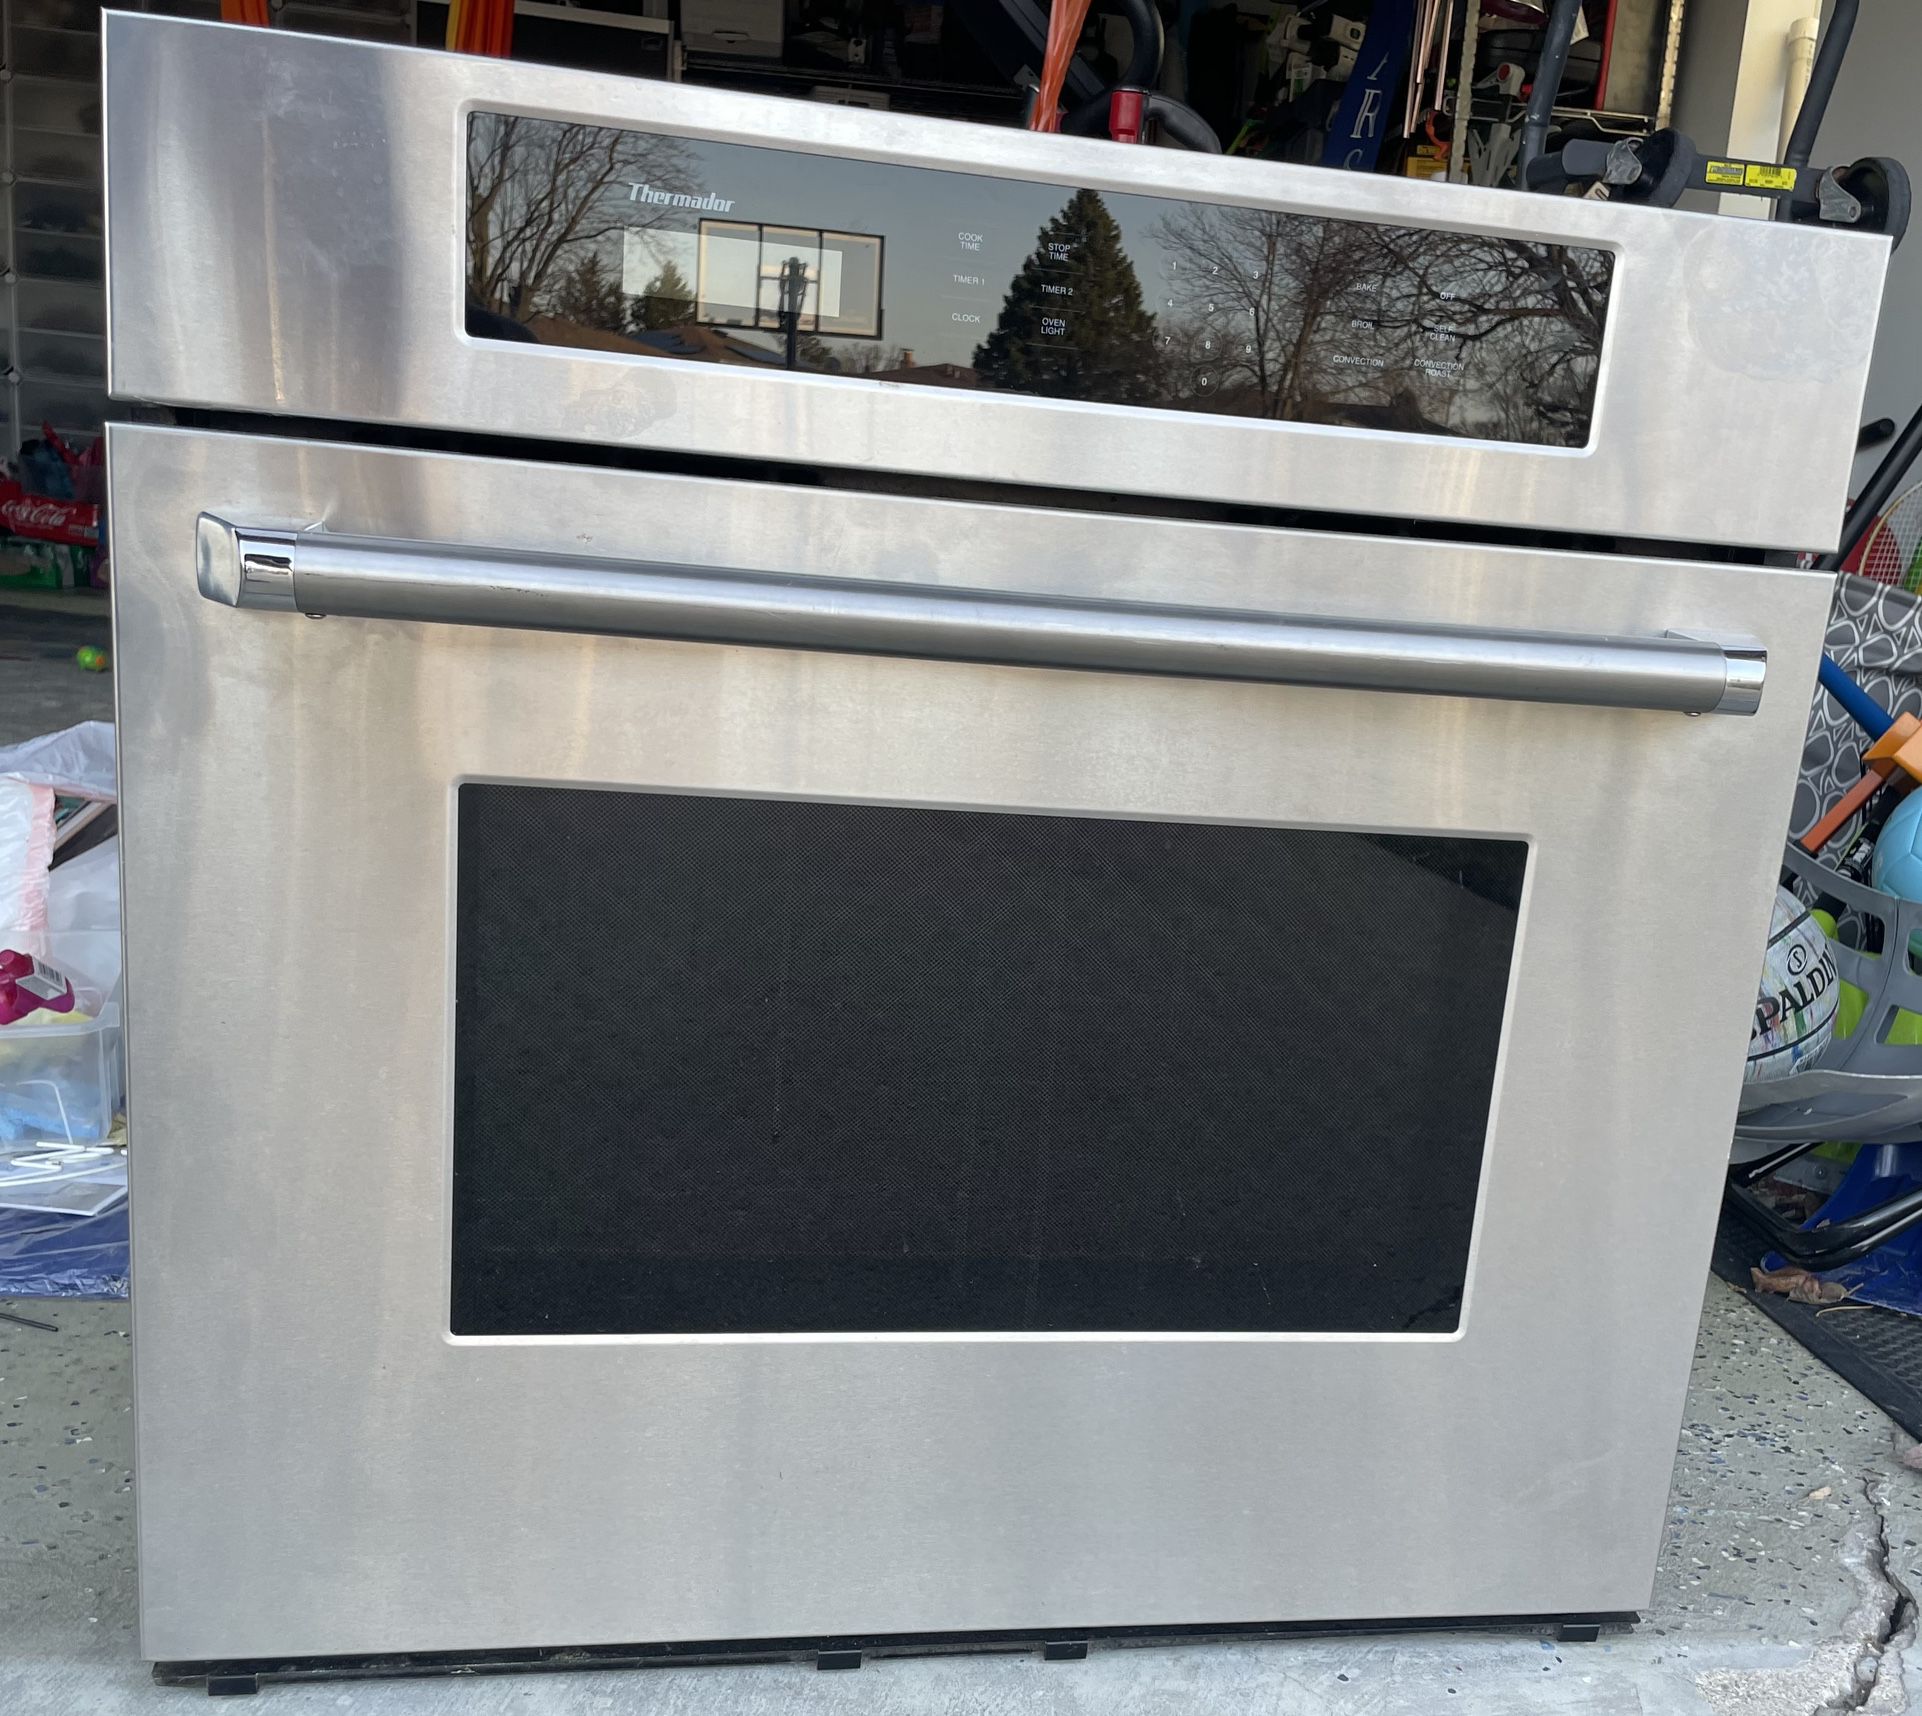 Thermador 30” Single Electric Wall Oven -SC301TP